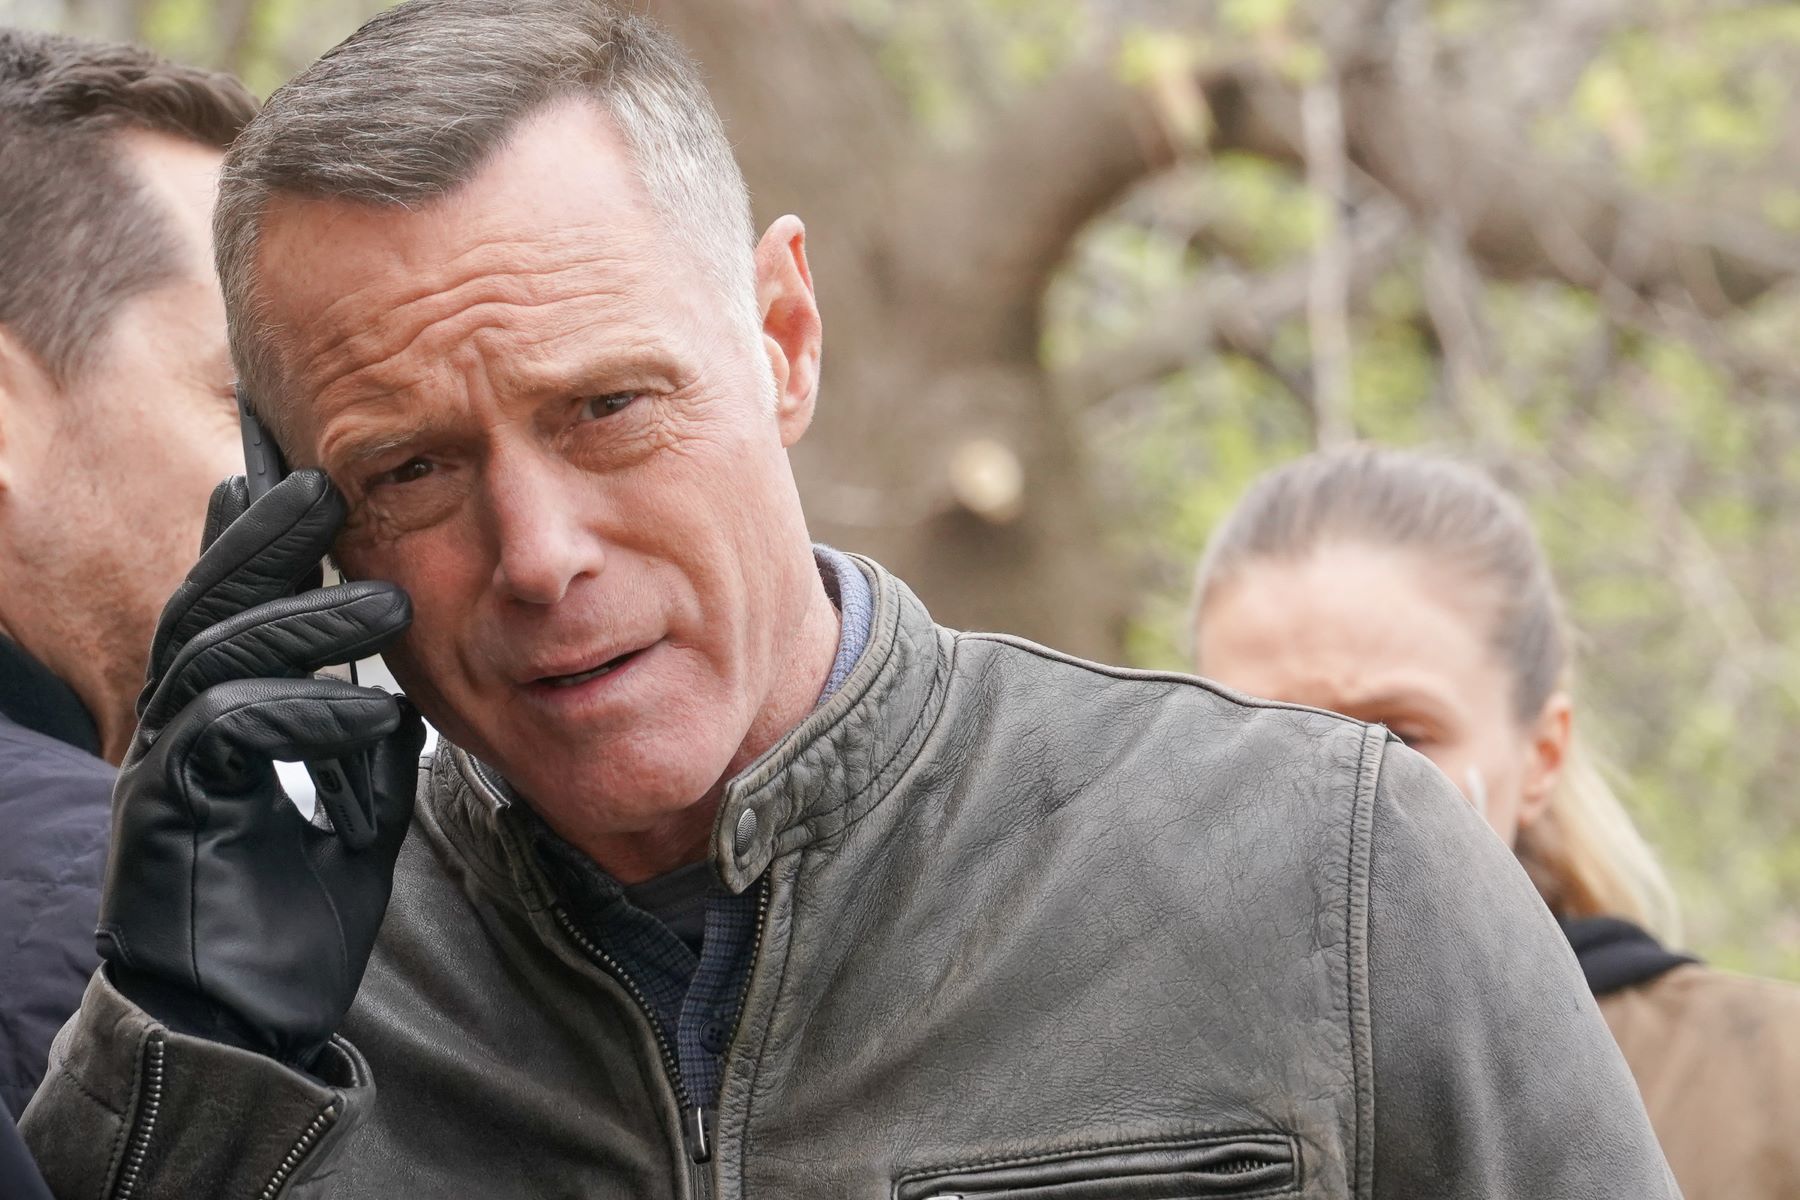 Jason Beghe as Hank Voight in 'Chicago P.D.'